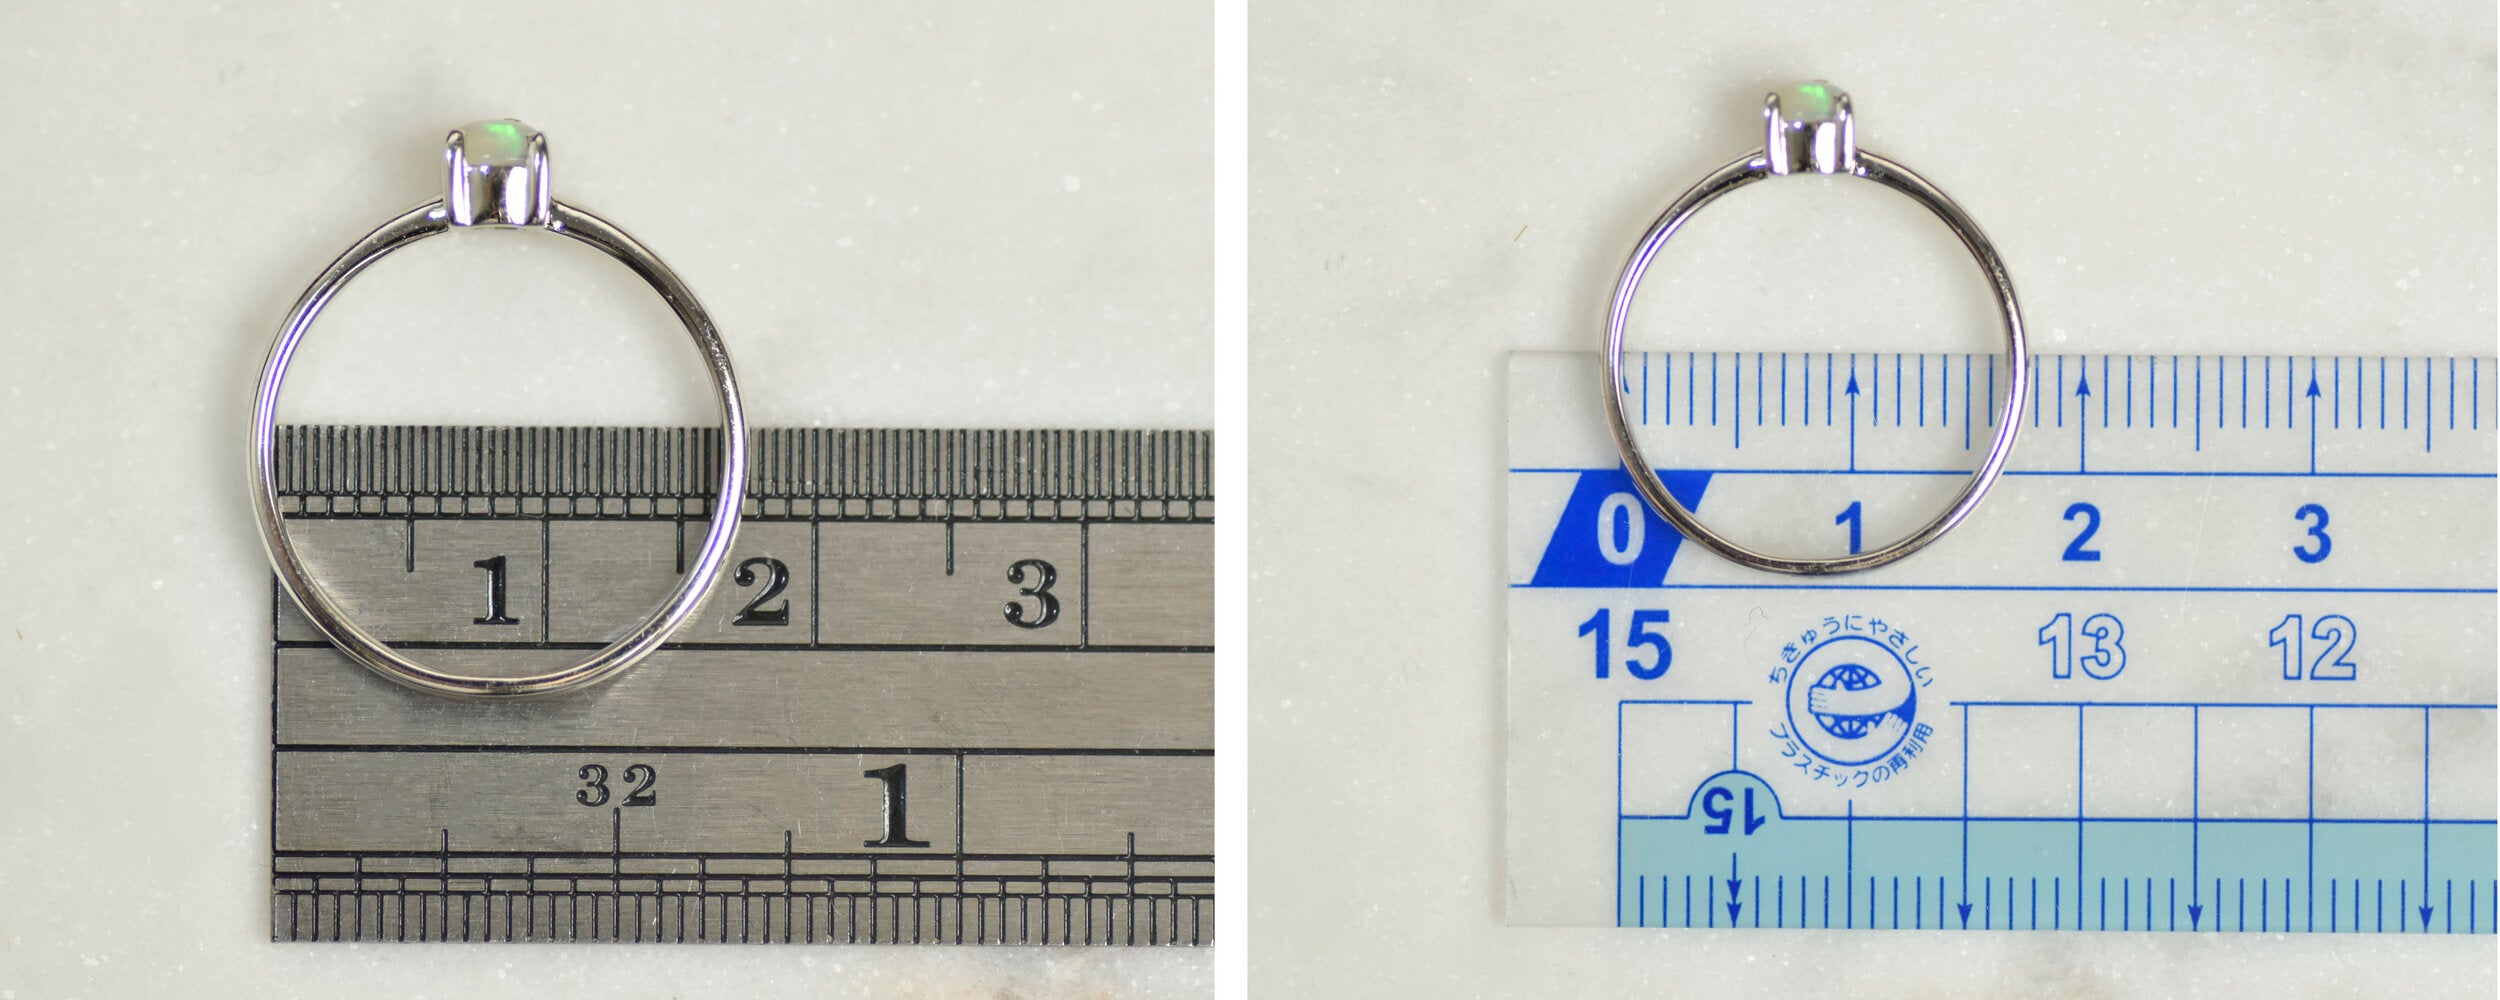 Please prioritize using a more accurate ruler to measure the inside of the ring.